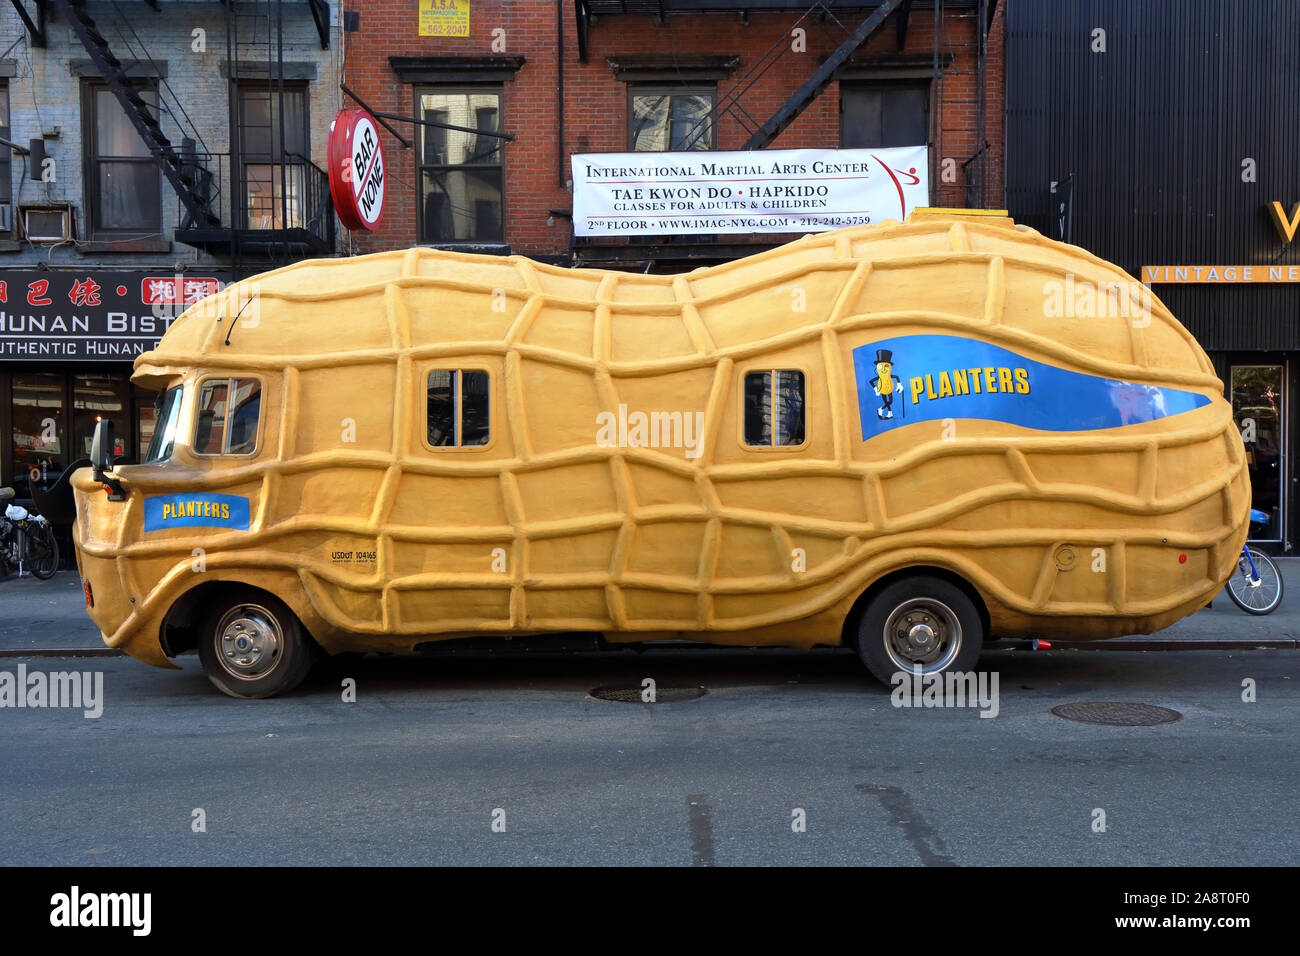 A Planters Nutmobile parked on a street in New York City Stock Photo